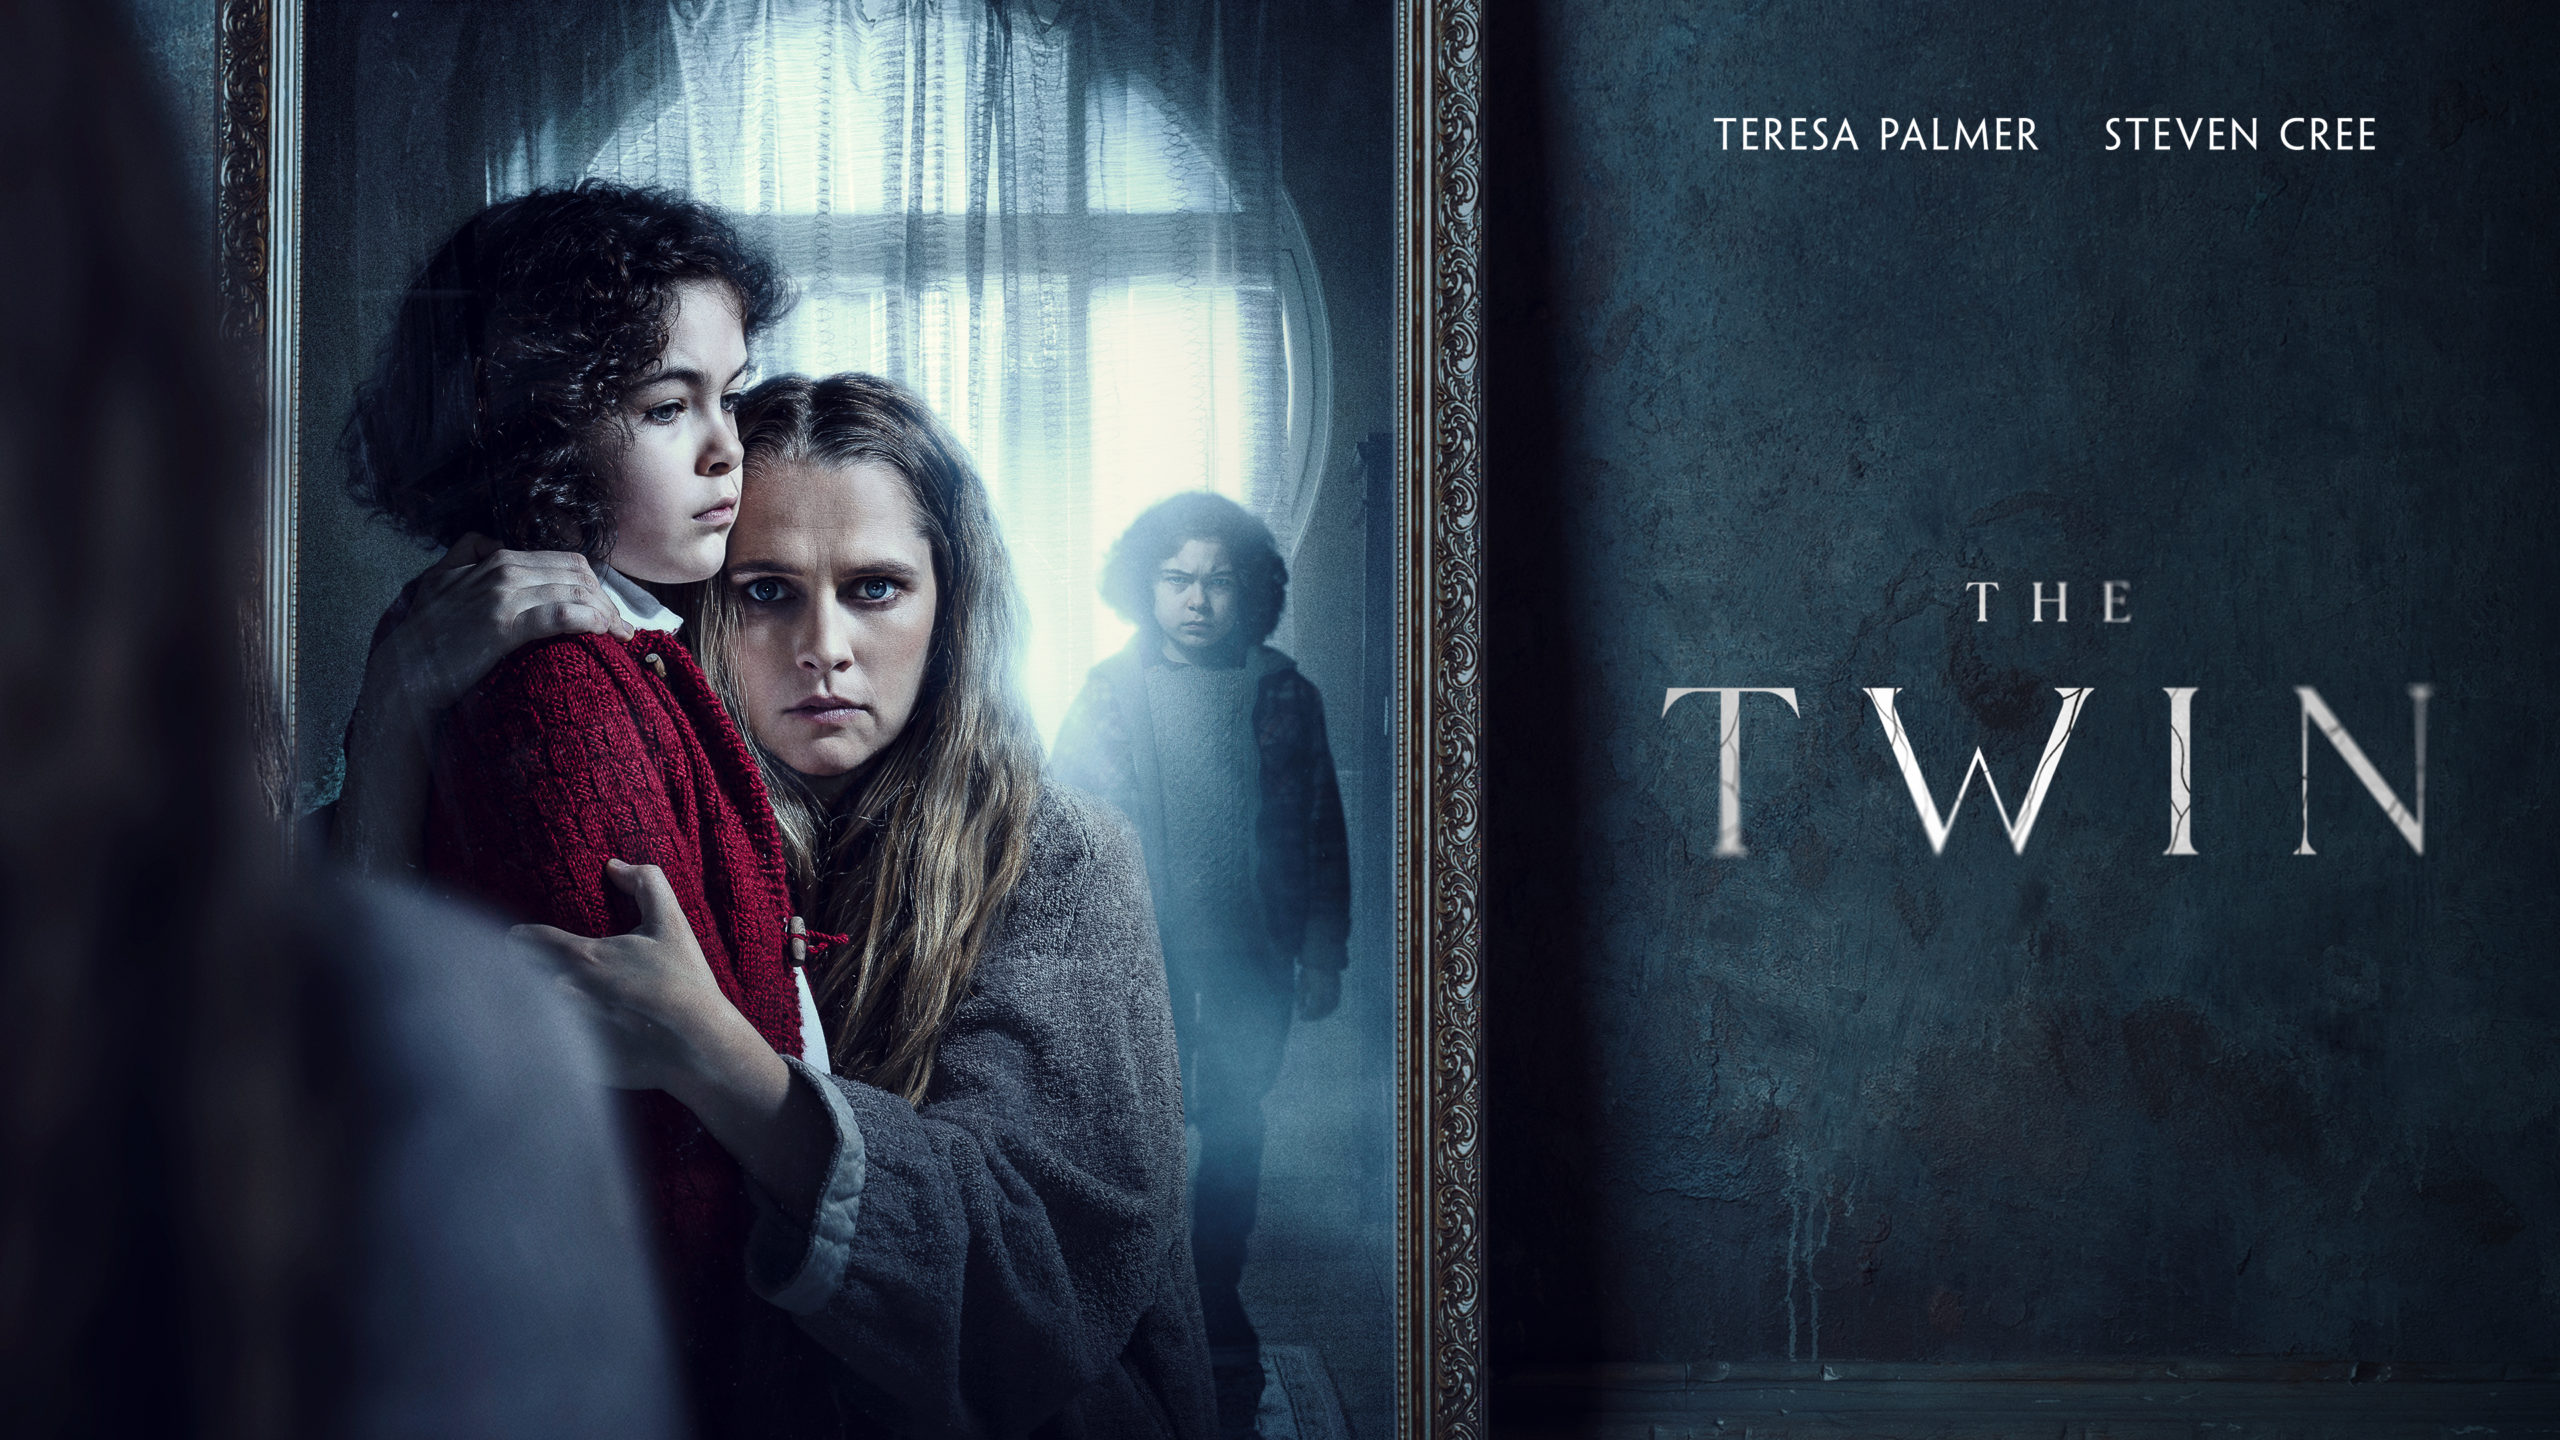 The Twin Trailer Has Teresa Palmer Seeing A Haunting Mirror Image of Her Child